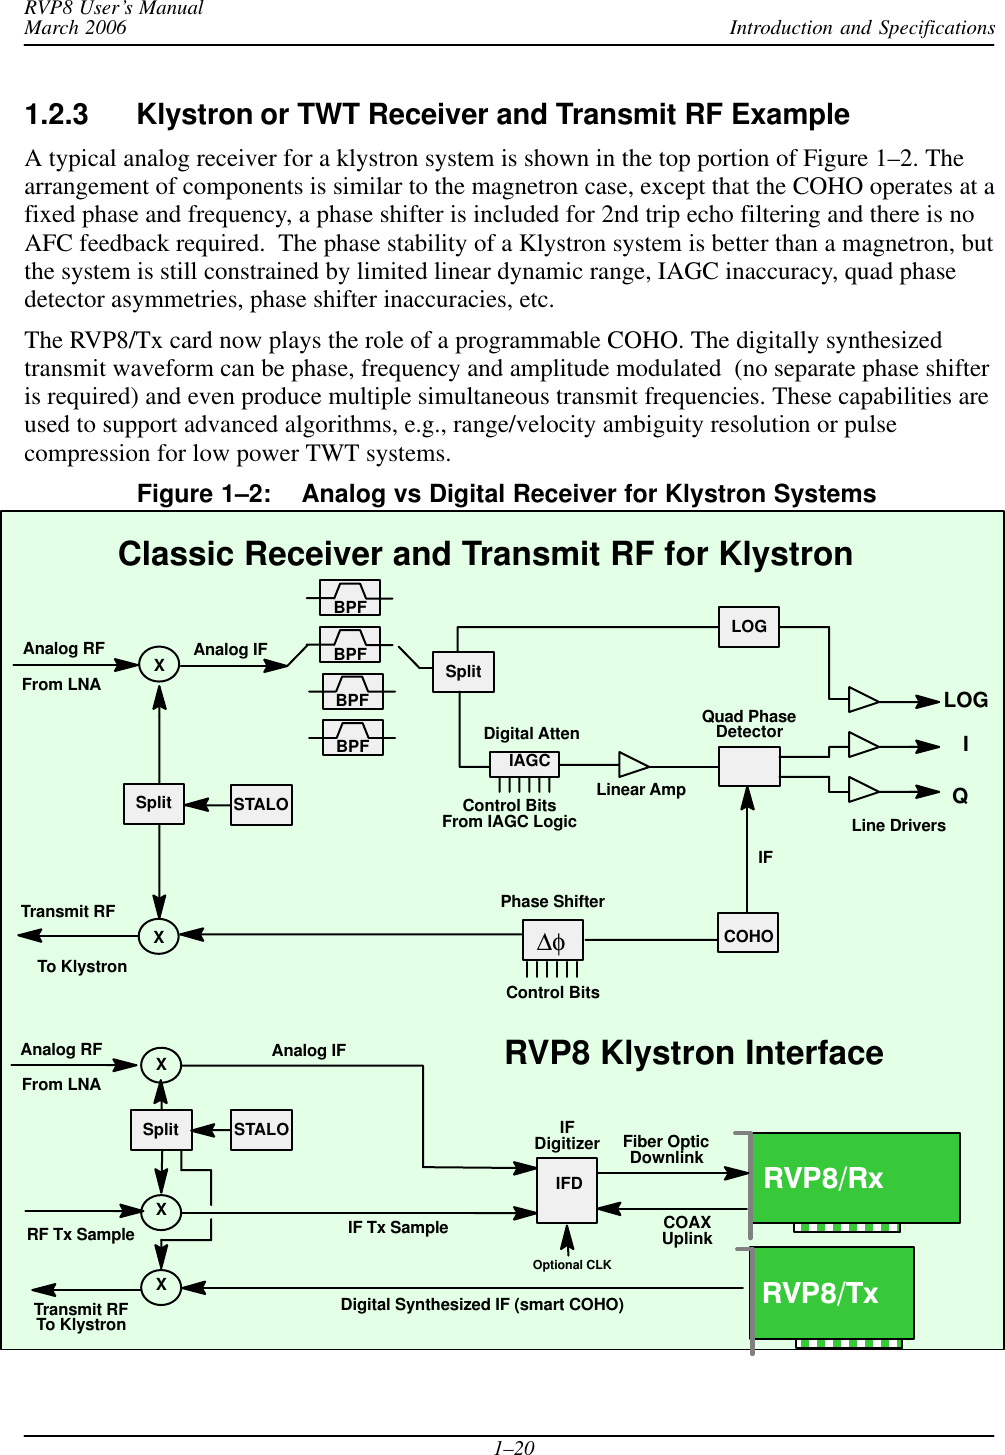 Introduction and SpecificationsRVP8 User’s ManualMarch 20061–201.2.3 Klystron or TWT Receiver and Transmit RF ExampleA typical analog receiver for a klystron system is shown in the top portion of Figure 1–2. Thearrangement of components is similar to the magnetron case, except that the COHO operates at afixed phase and frequency, a phase shifter is included for 2nd trip echo filtering and there is noAFC feedback required.  The phase stability of a Klystron system is better than a magnetron, butthe system is still constrained by limited linear dynamic range, IAGC inaccuracy, quad phasedetector asymmetries, phase shifter inaccuracies, etc.The RVP8/Tx card now plays the role of a programmable COHO. The digitally synthesizedtransmit waveform can be phase, frequency and amplitude modulated  (no separate phase shifteris required) and even produce multiple simultaneous transmit frequencies. These capabilities areused to support advanced algorithms, e.g., range/velocity ambiguity resolution or pulsecompression for low power TWT systems.Figure 1–2: Analog vs Digital Receiver for Klystron SystemsClassic Receiver and Transmit RF for KlystronCOHORVP8 Klystron InterfaceTransmit RFXTo KlystronAnalog IF IFDigital AttenControl BitsIAGCSplitLOGLinear AmpQuad PhaseDetectorFrom IAGC LogicSplitIQLOGLine DriversBPFBPFBPFXAnalog RFFrom LNABPFAnalog IFIFDigitizer Fiber OpticIF Tx SampleRF Tx SampleXDigital Synthesized IF (smart COHO)COAXUplinkIFDDownlinkXAnalog RFFrom LNASplitXTransmit RFTo KlystronOptional CLKRVP8/TxRVP8/RxΔφPhase ShifterControl BitsSTALOSTALO